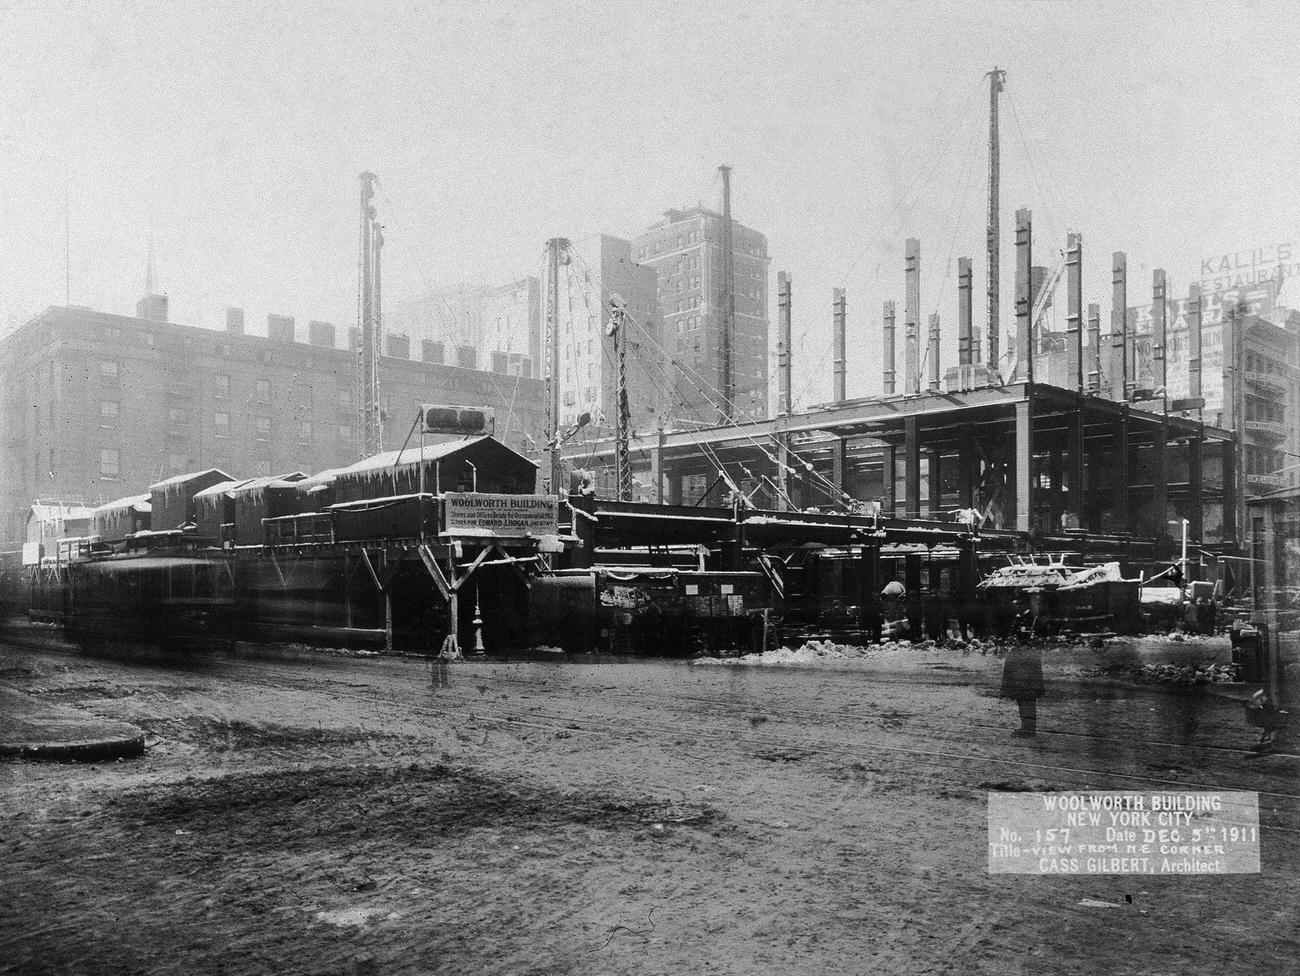 Police Officers Stand Guard Outside The Woolworth Building Construction Site, As Seen From The Northeast Corner, As A Trolley Car Speeds By, 1913.